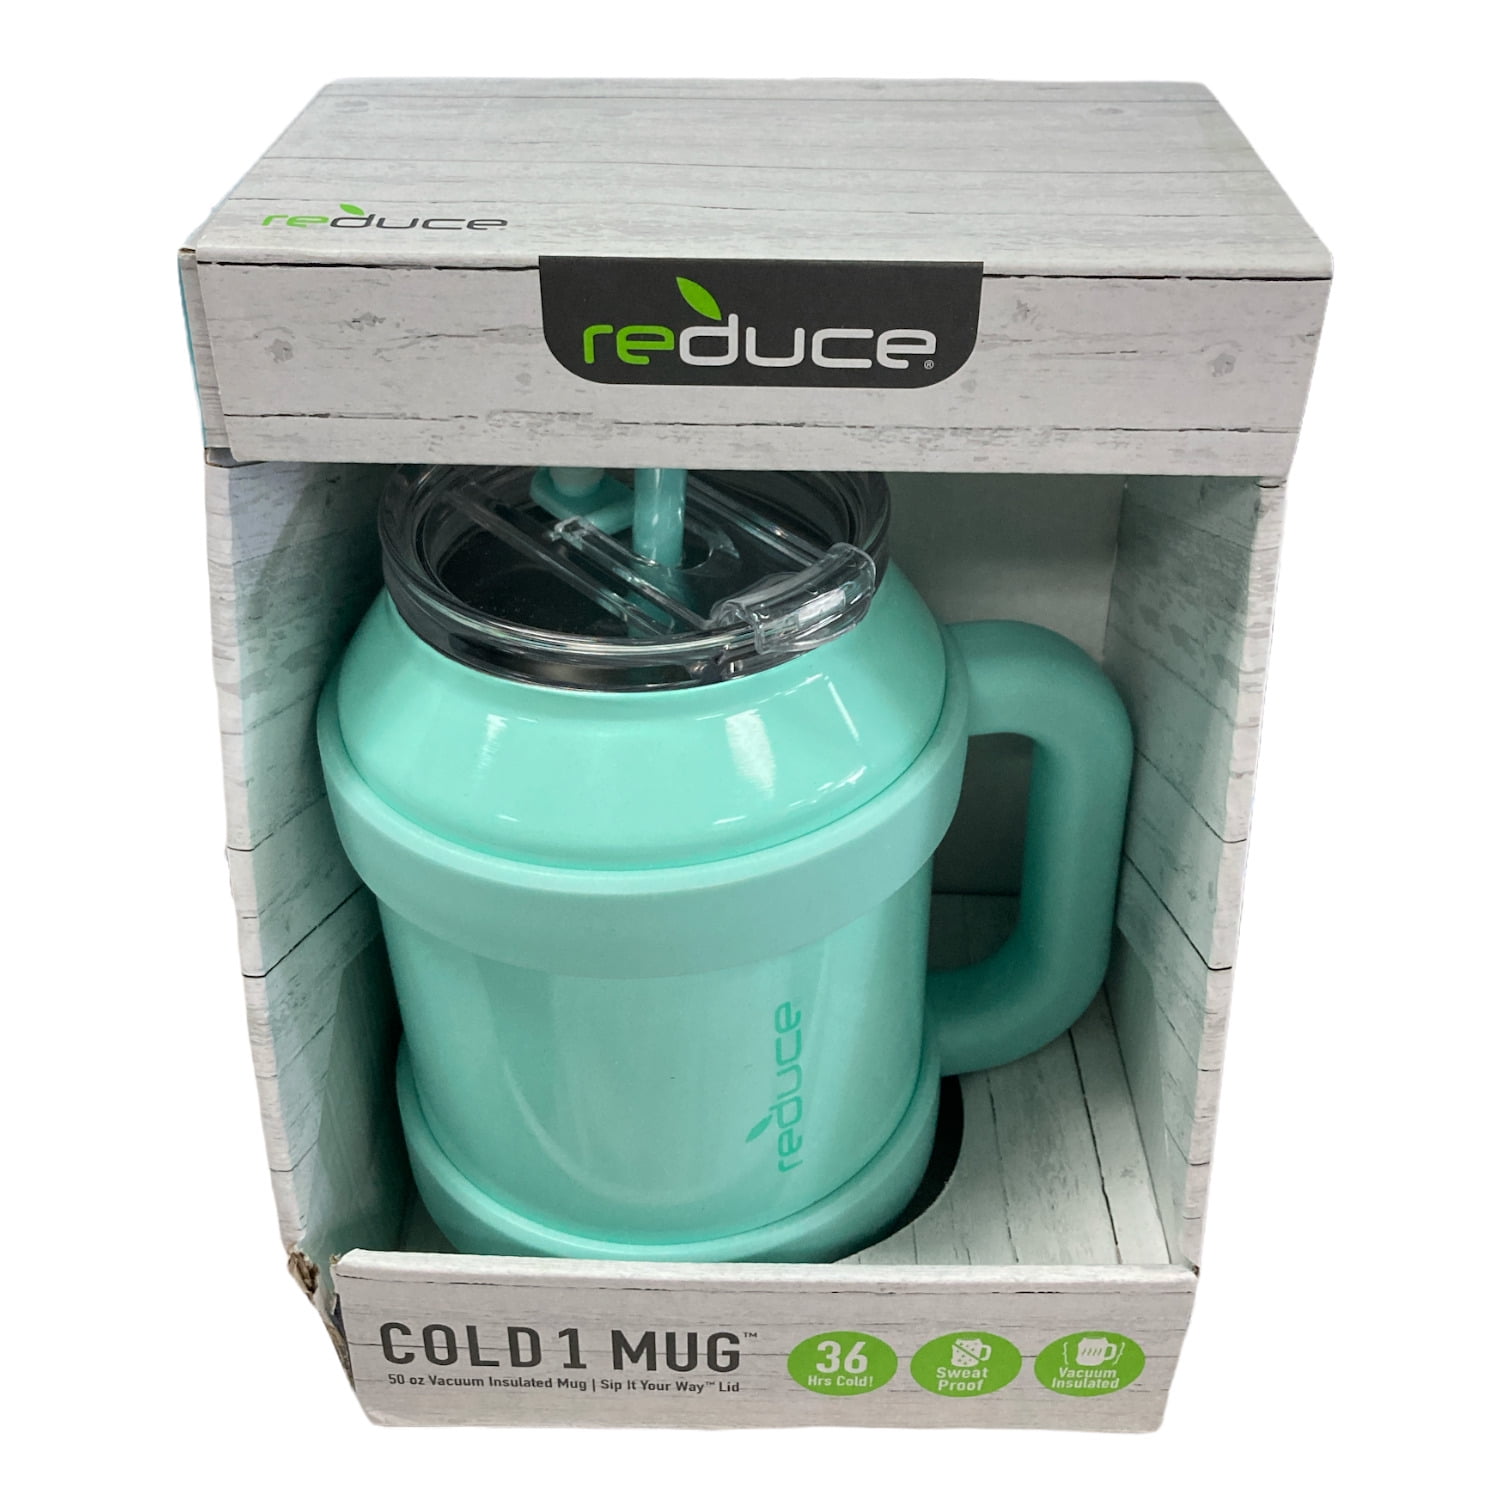 Reduce Cold1 50 oz. Mug Stainless Steel - HapyDeals